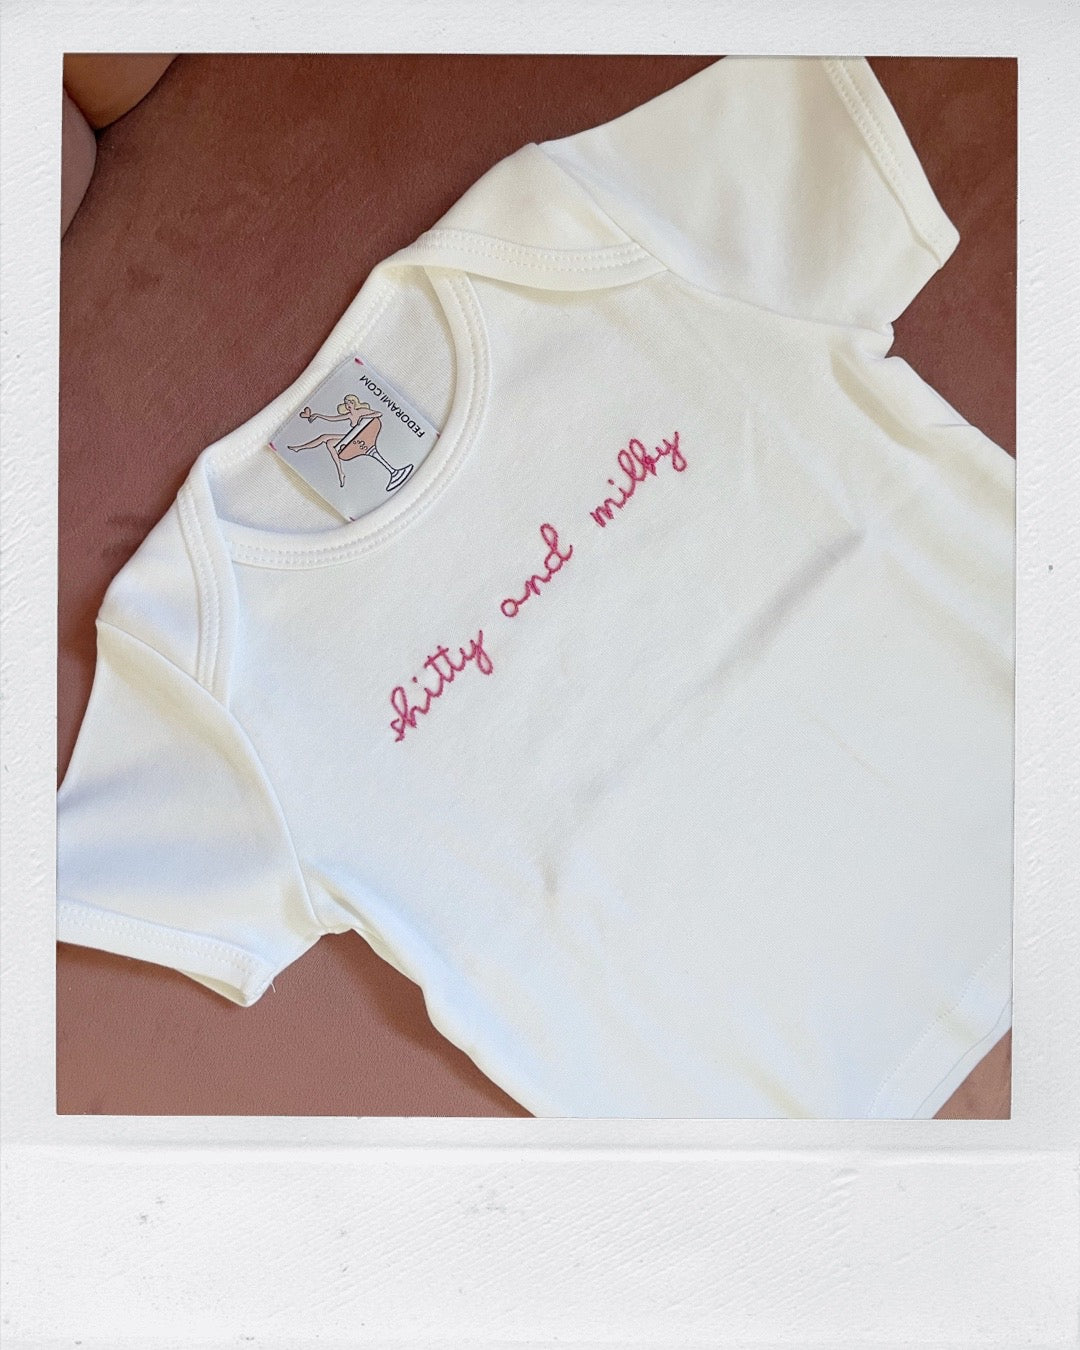 Shitty and Milky - a baby tee